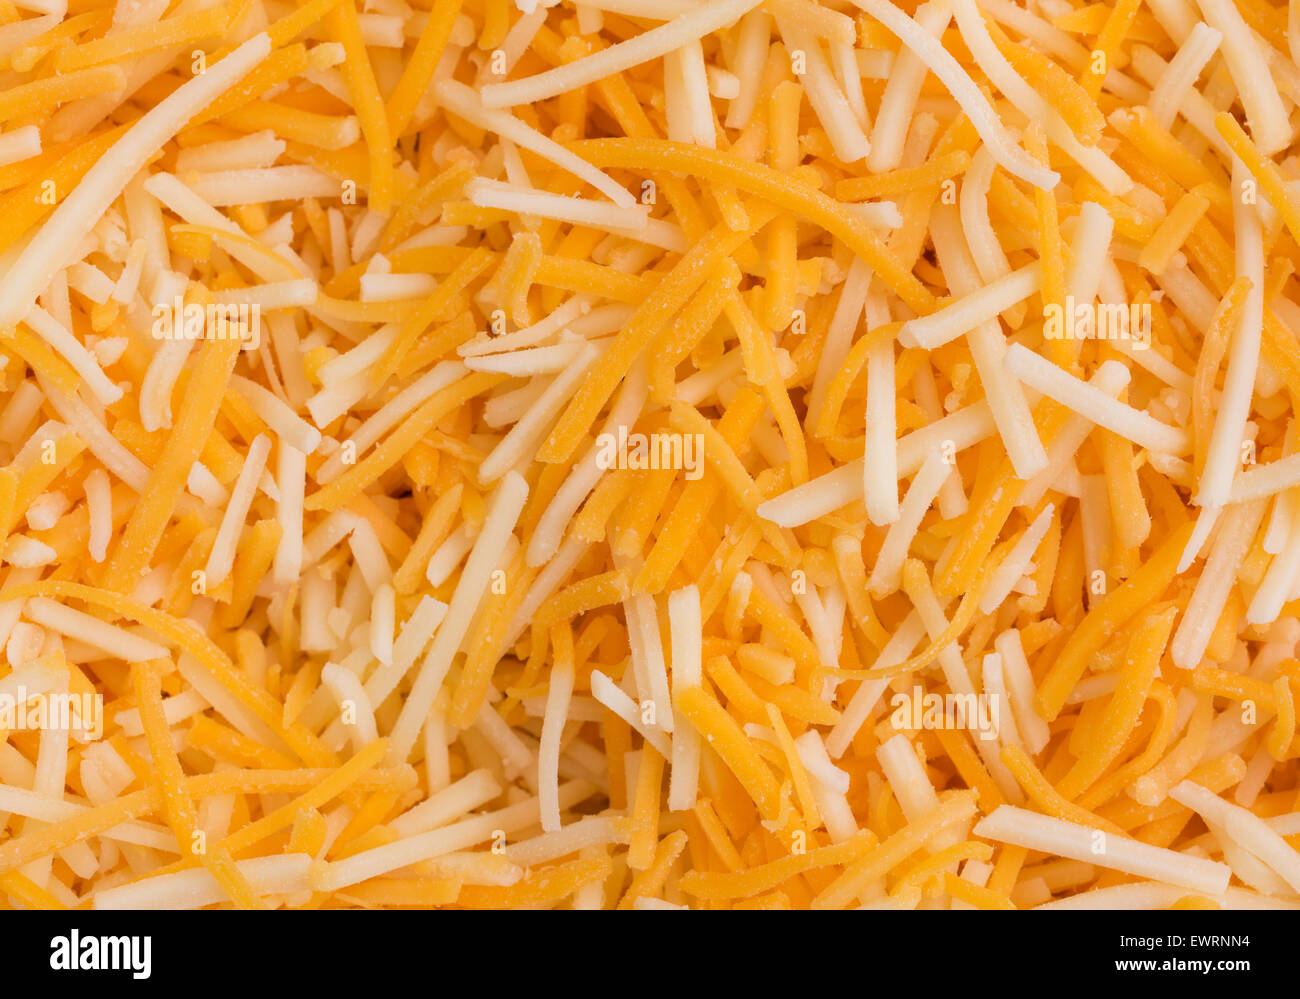 Close view of a shredded white cheddar, sharp cheddar and mild cheddar cheeses. Stock Photo